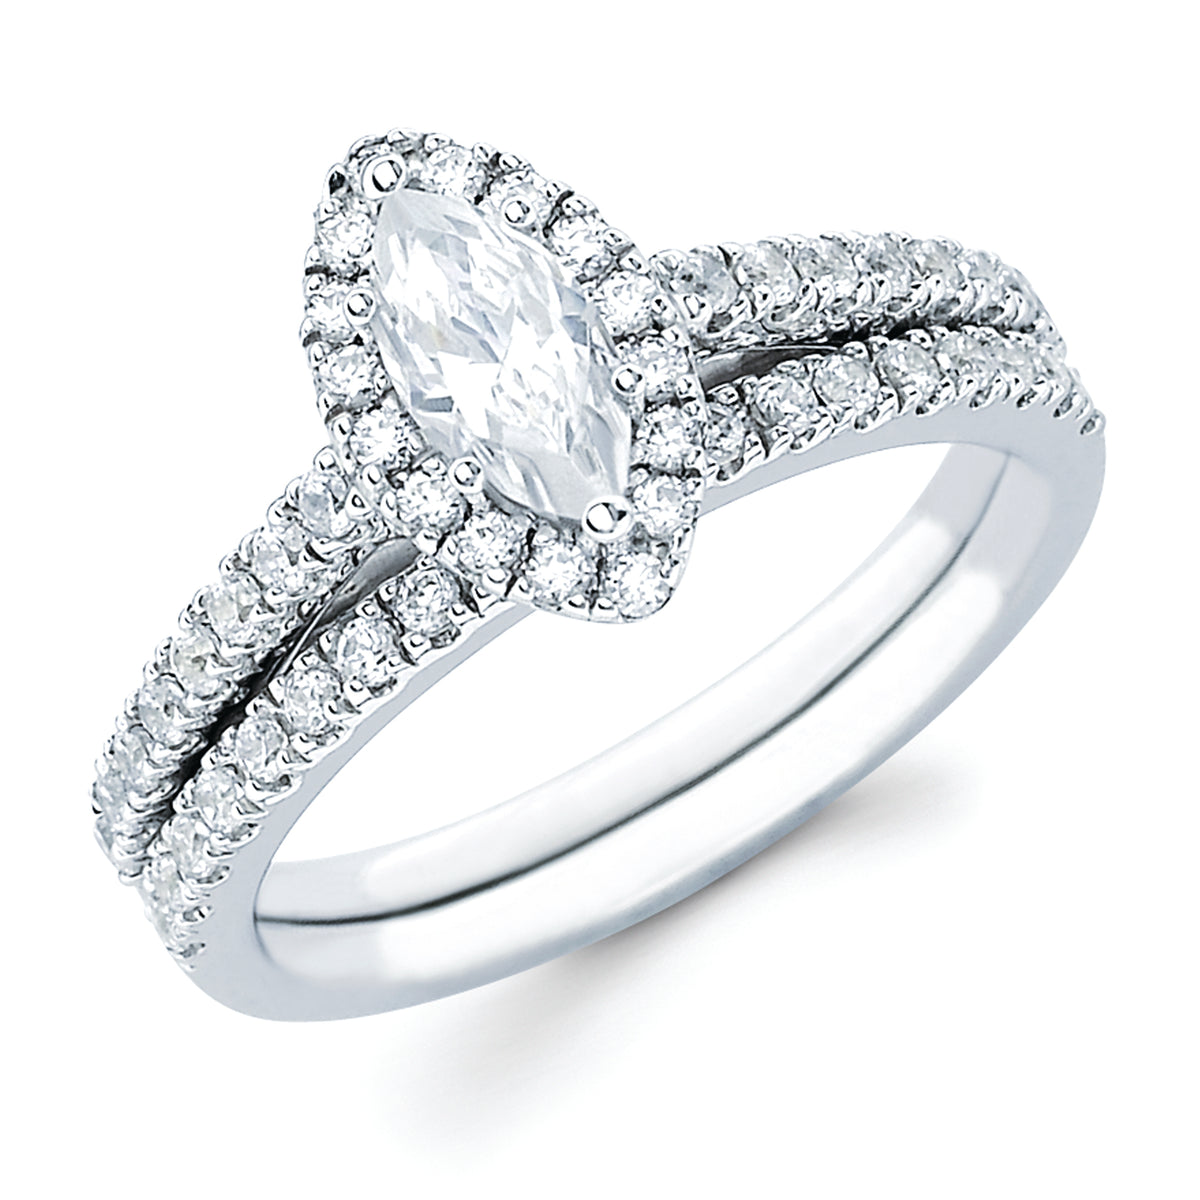 Halo Bridal: 1/3 Ctw. Diamond Halo Semi Mount available for 1/2 Ct. Marquise Cut Center Diamond in 14K Gold